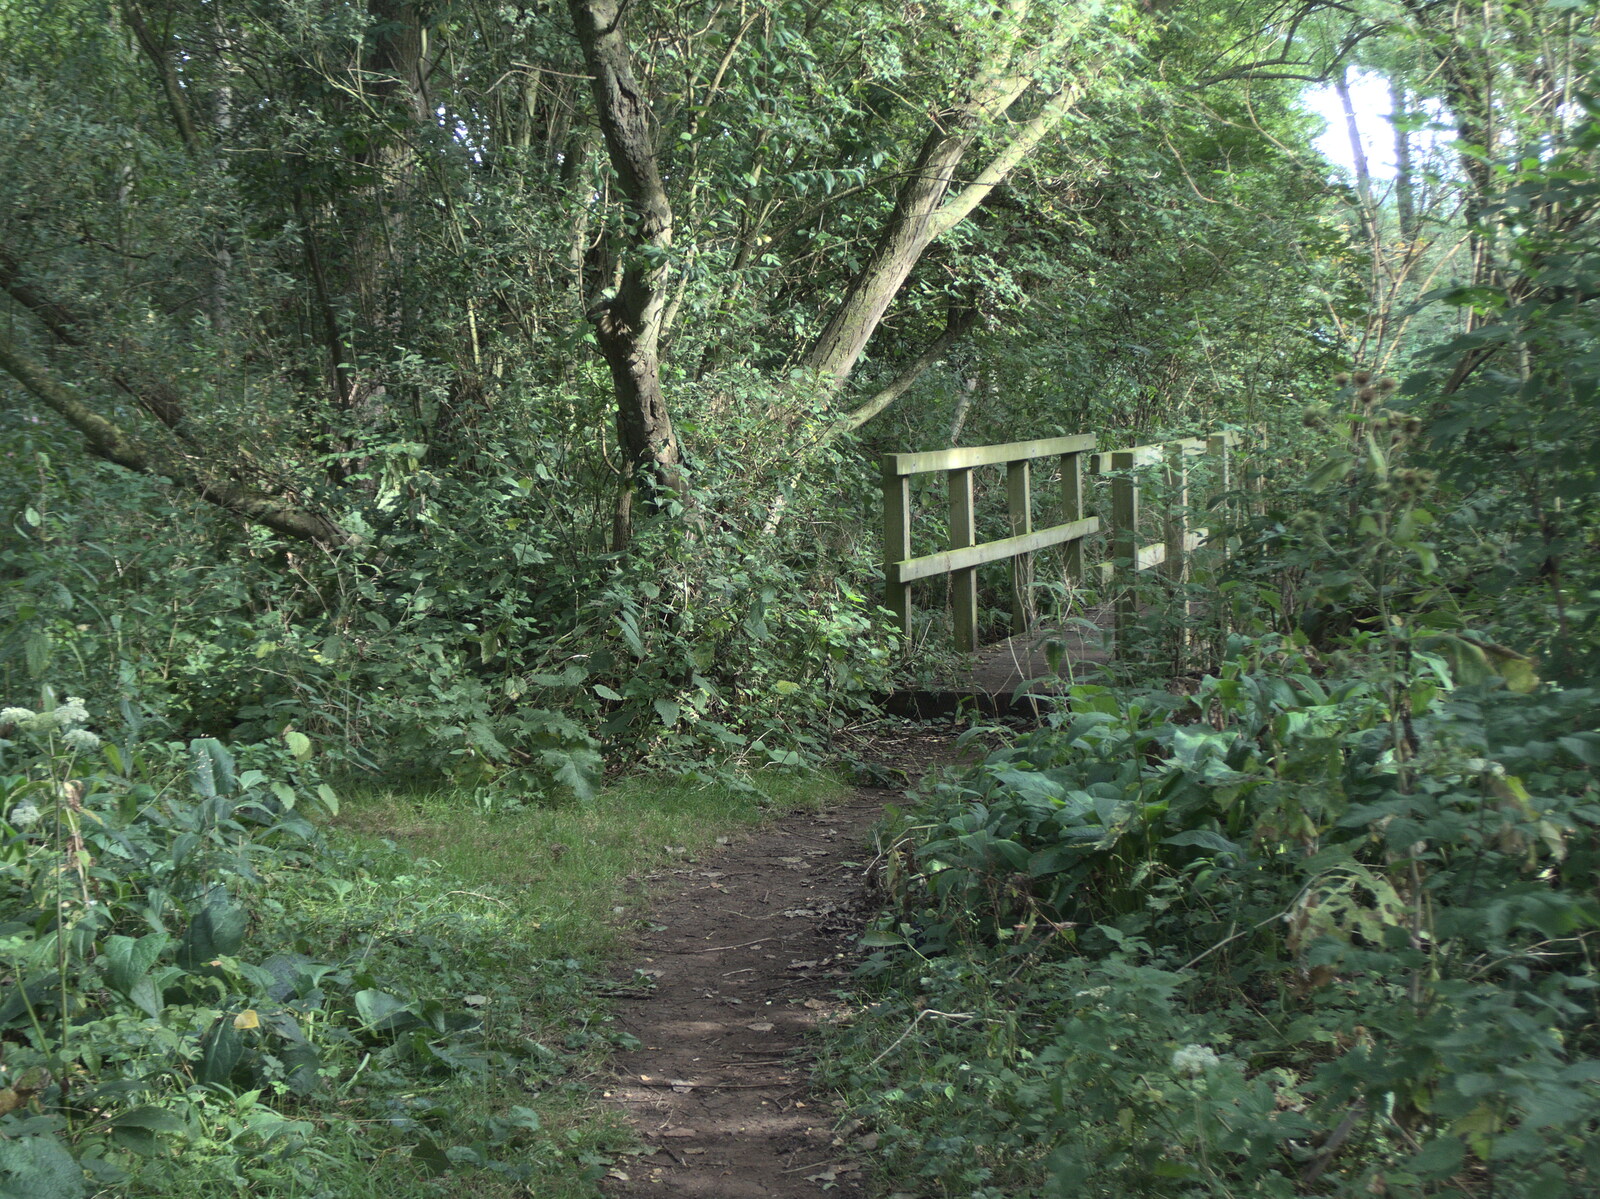 The Last Weavers Ever, Market Hill, Diss, Norfolk - 10th September 2021: A bridge over a stream in the Town Moors woods